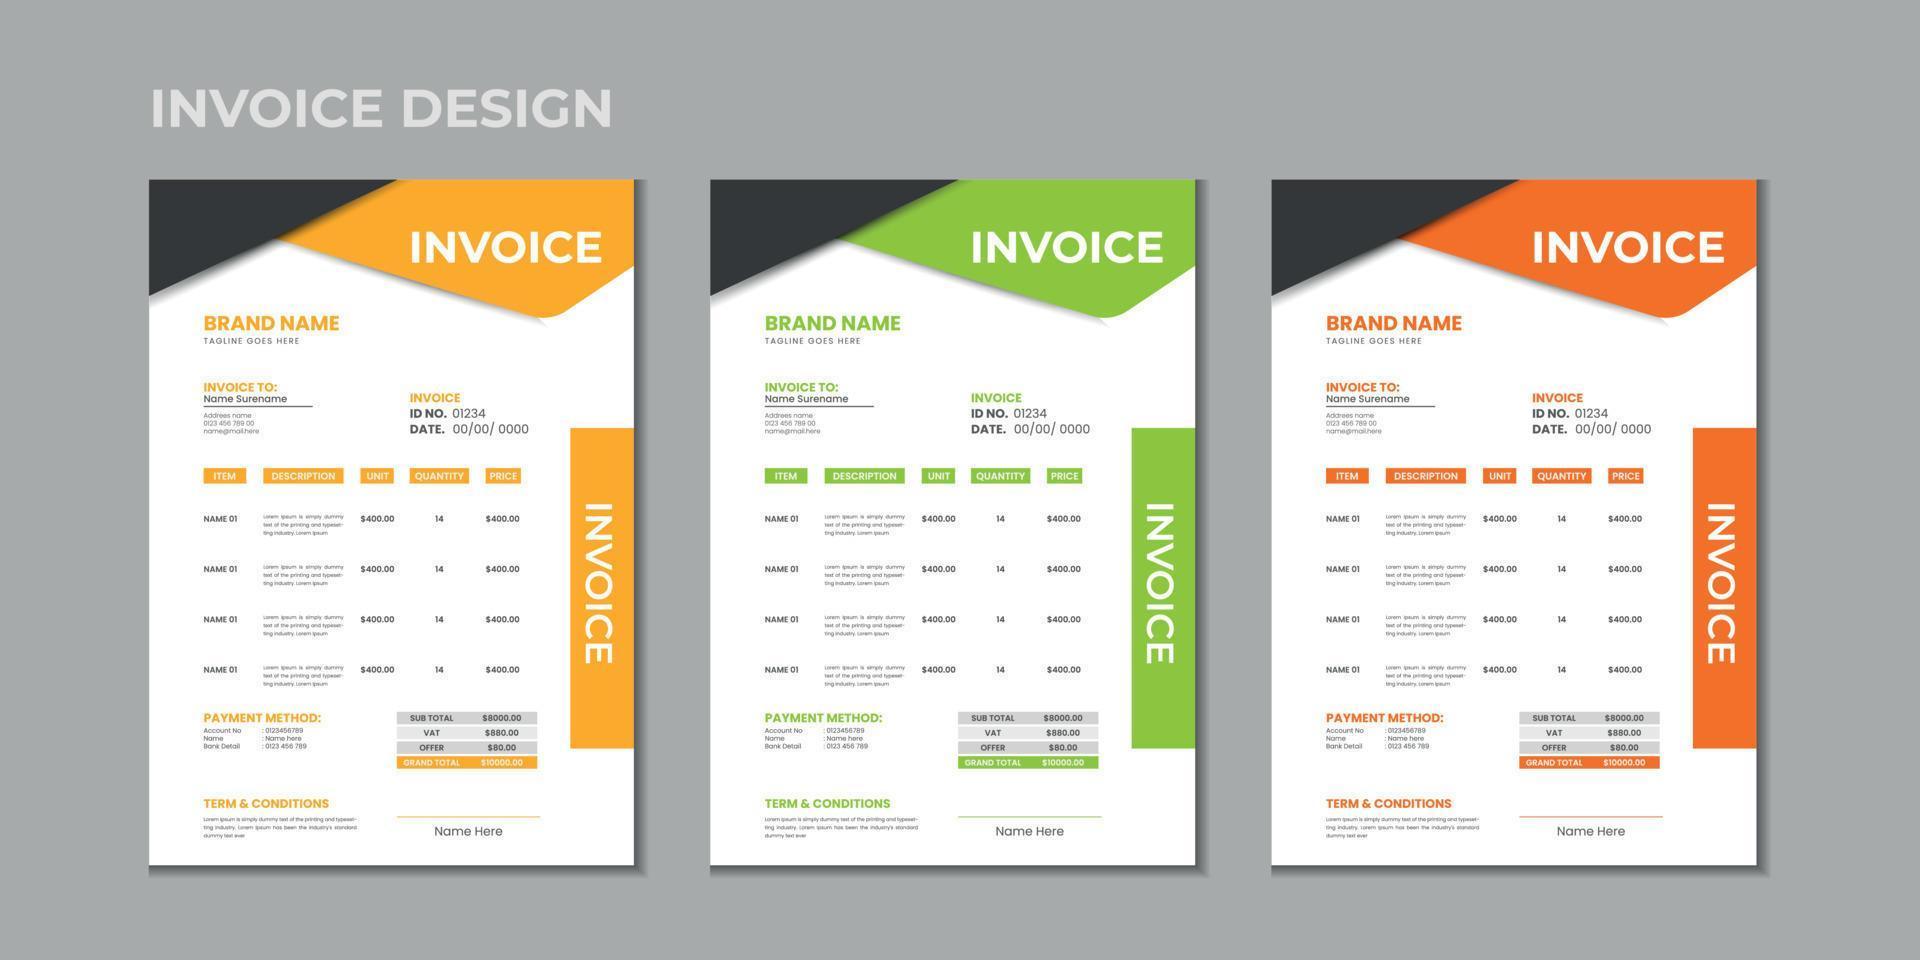 Minimal corporate Business multiple color variation a4 size vector invoice design template